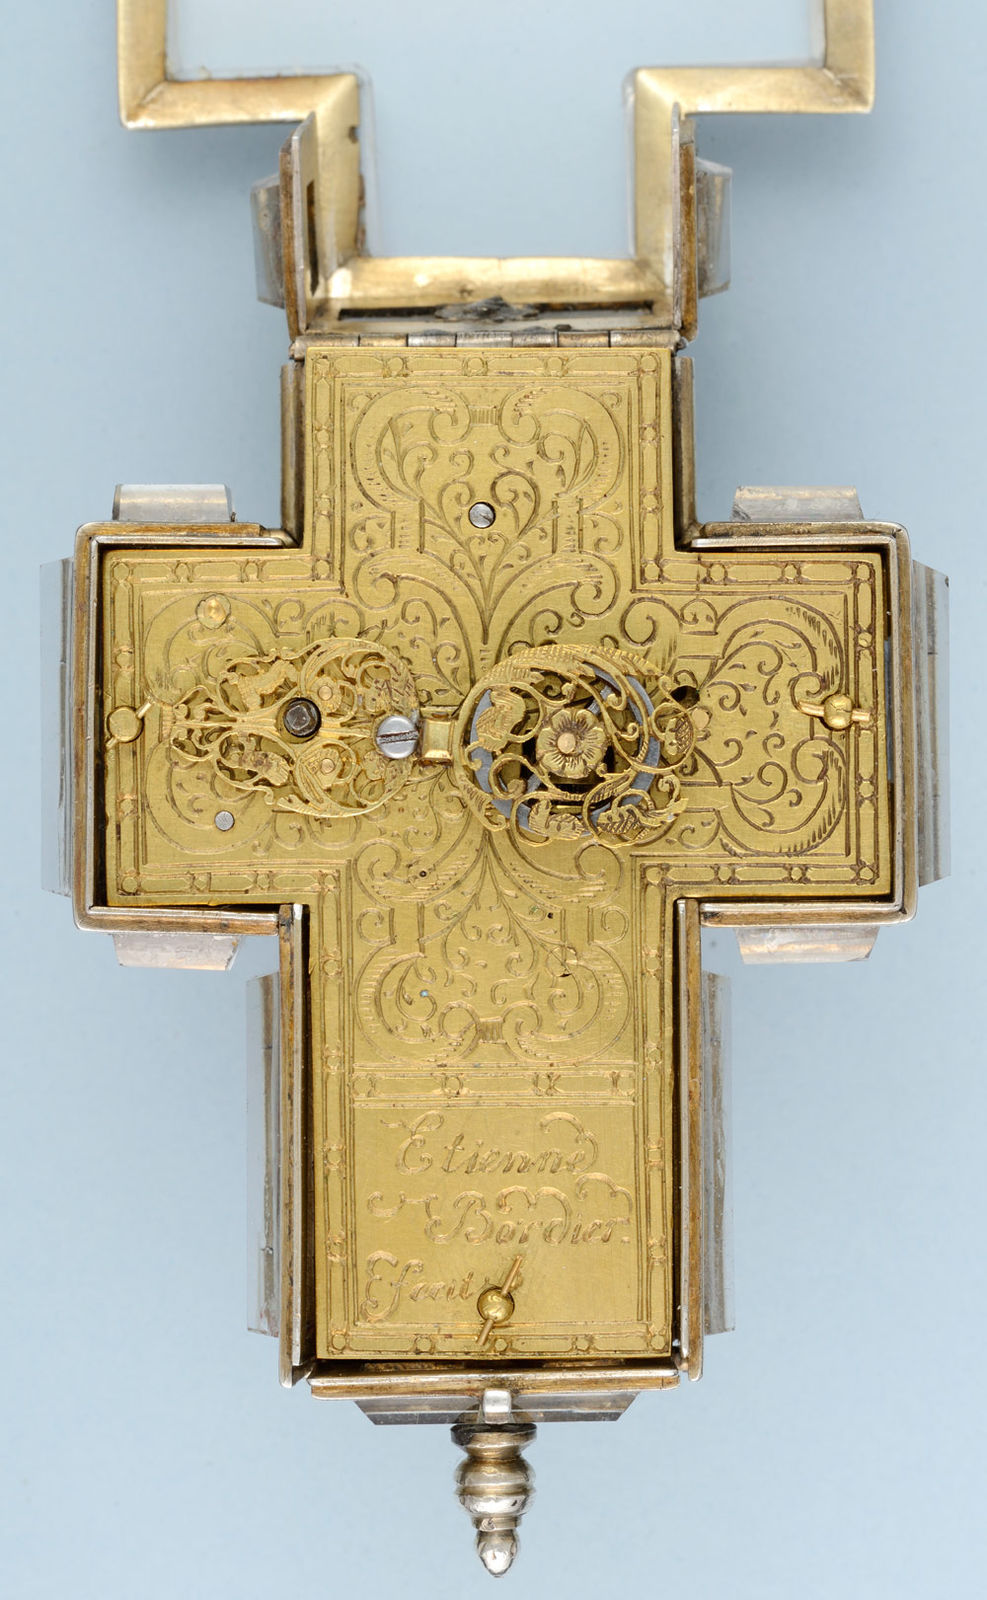 Rare Crucifix Form Watch - Image 4 of 7